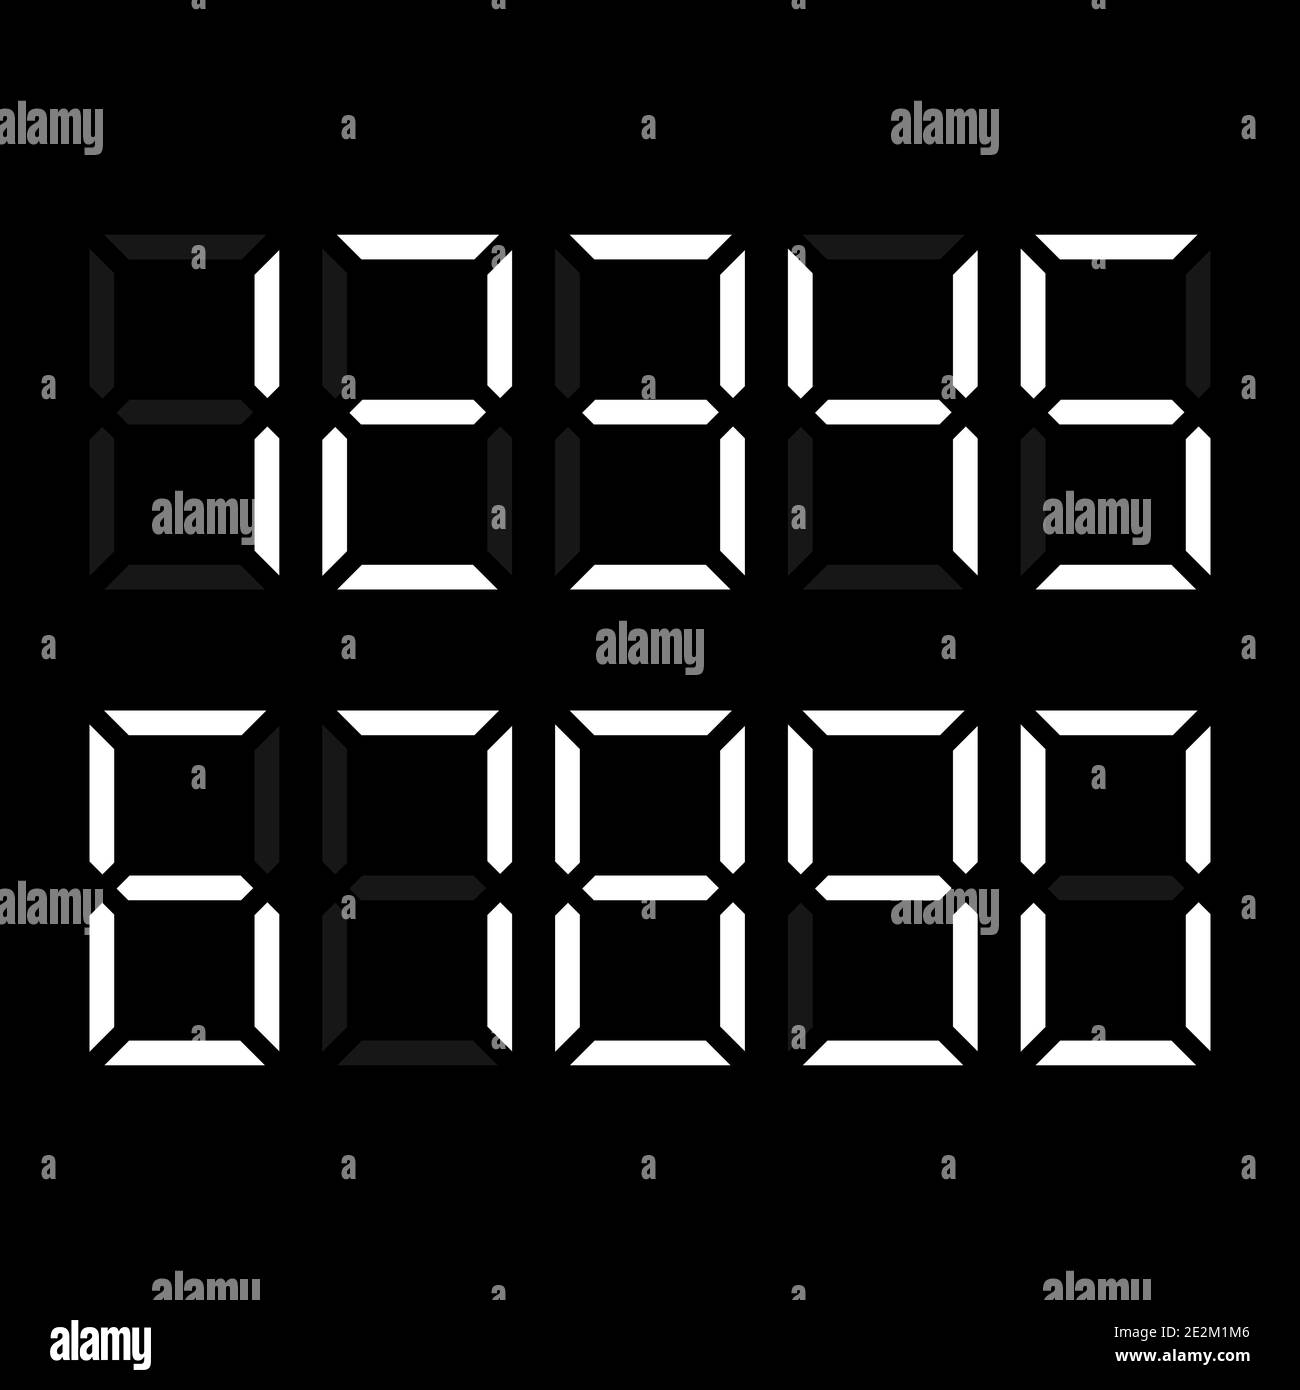 Numbers illustration Black and White Stock Photos & Images - Alamy